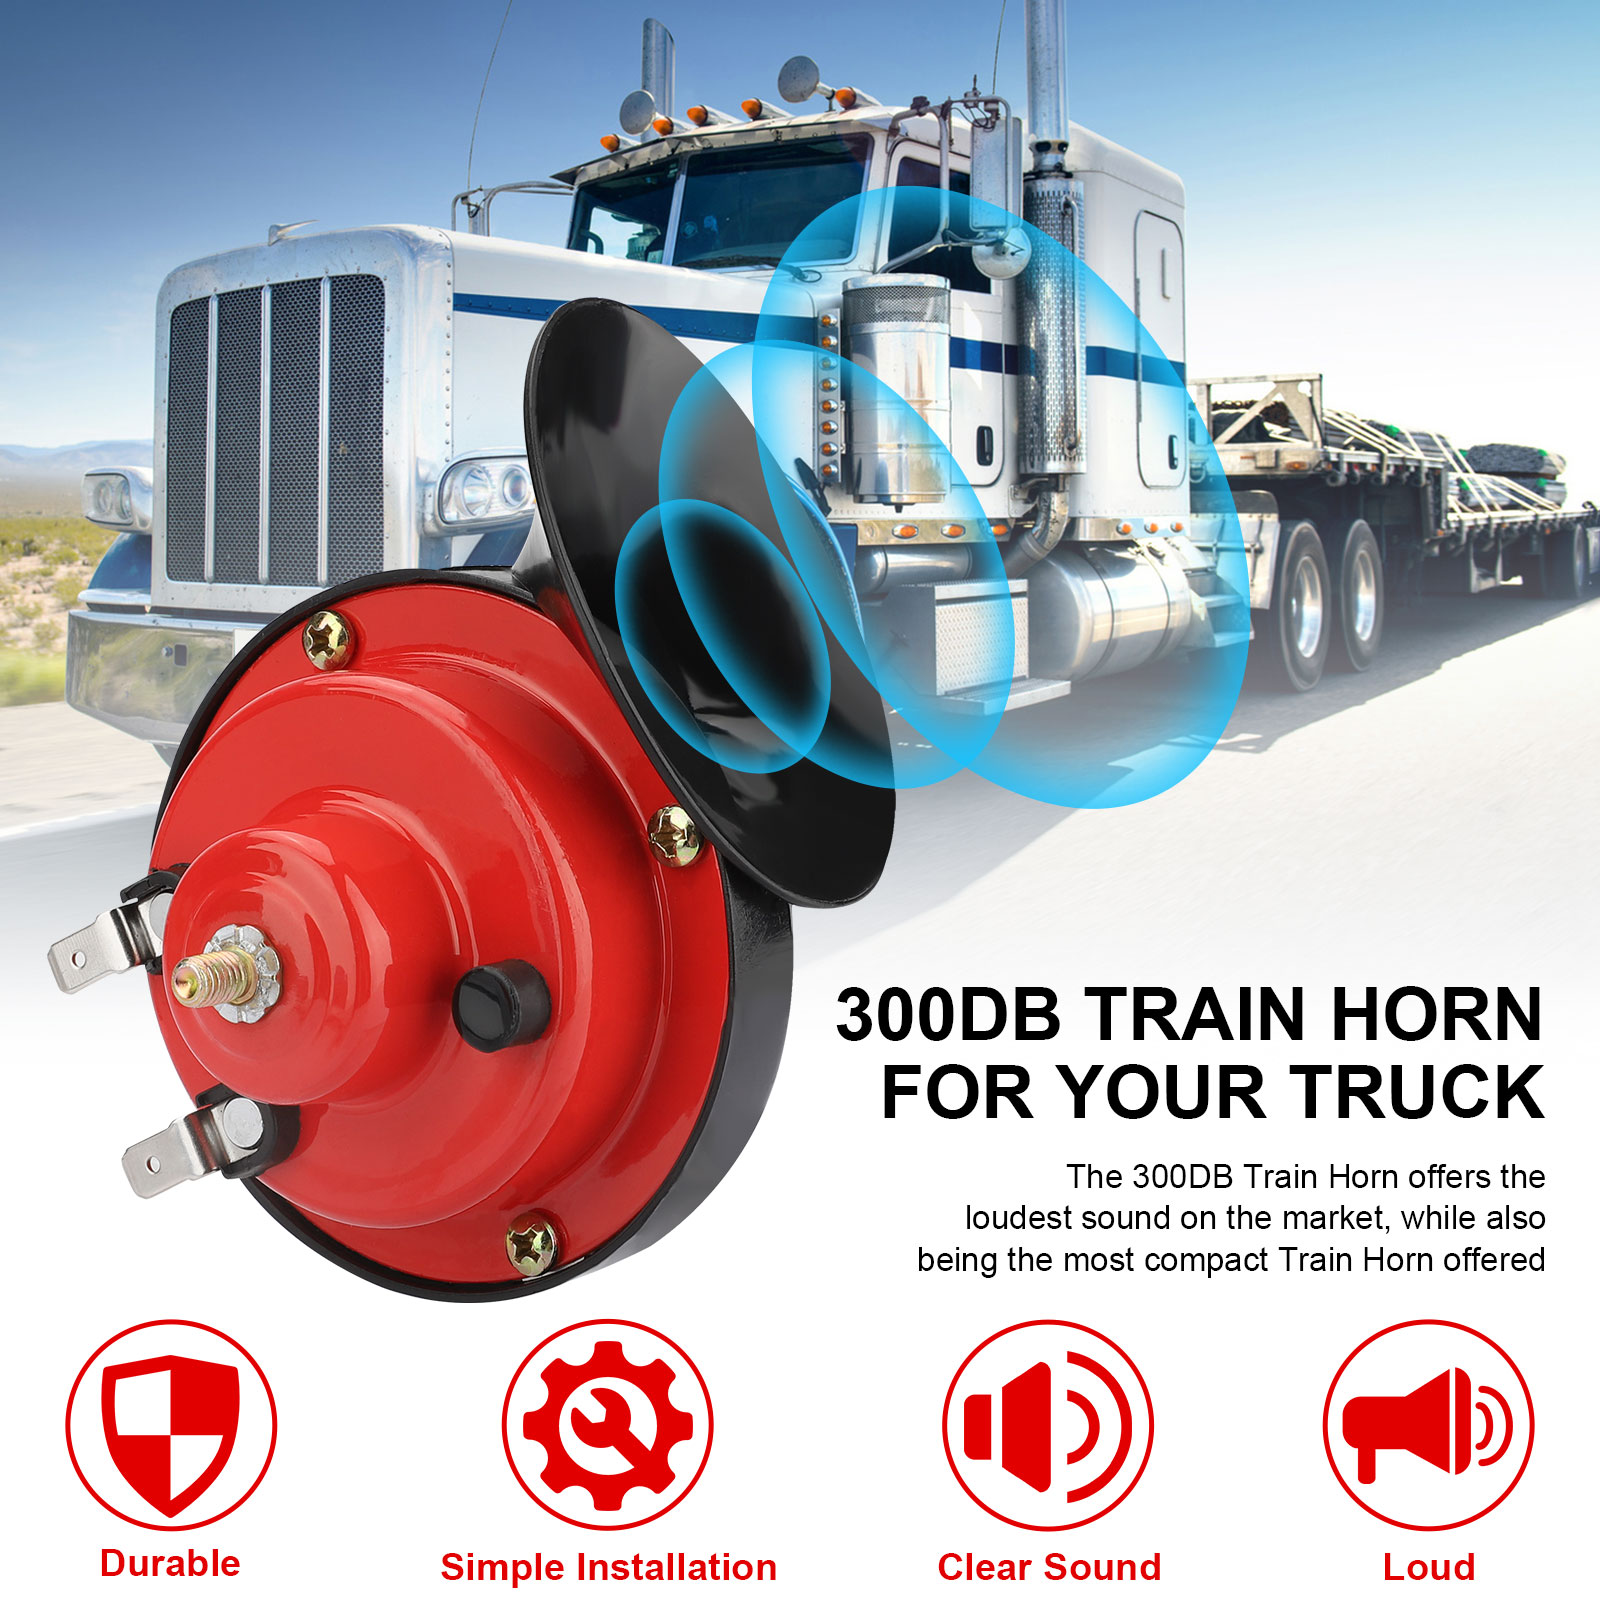 12V 300DB Loud Train Horn Waterproof for Motorcycles Car Truck SUV Boat